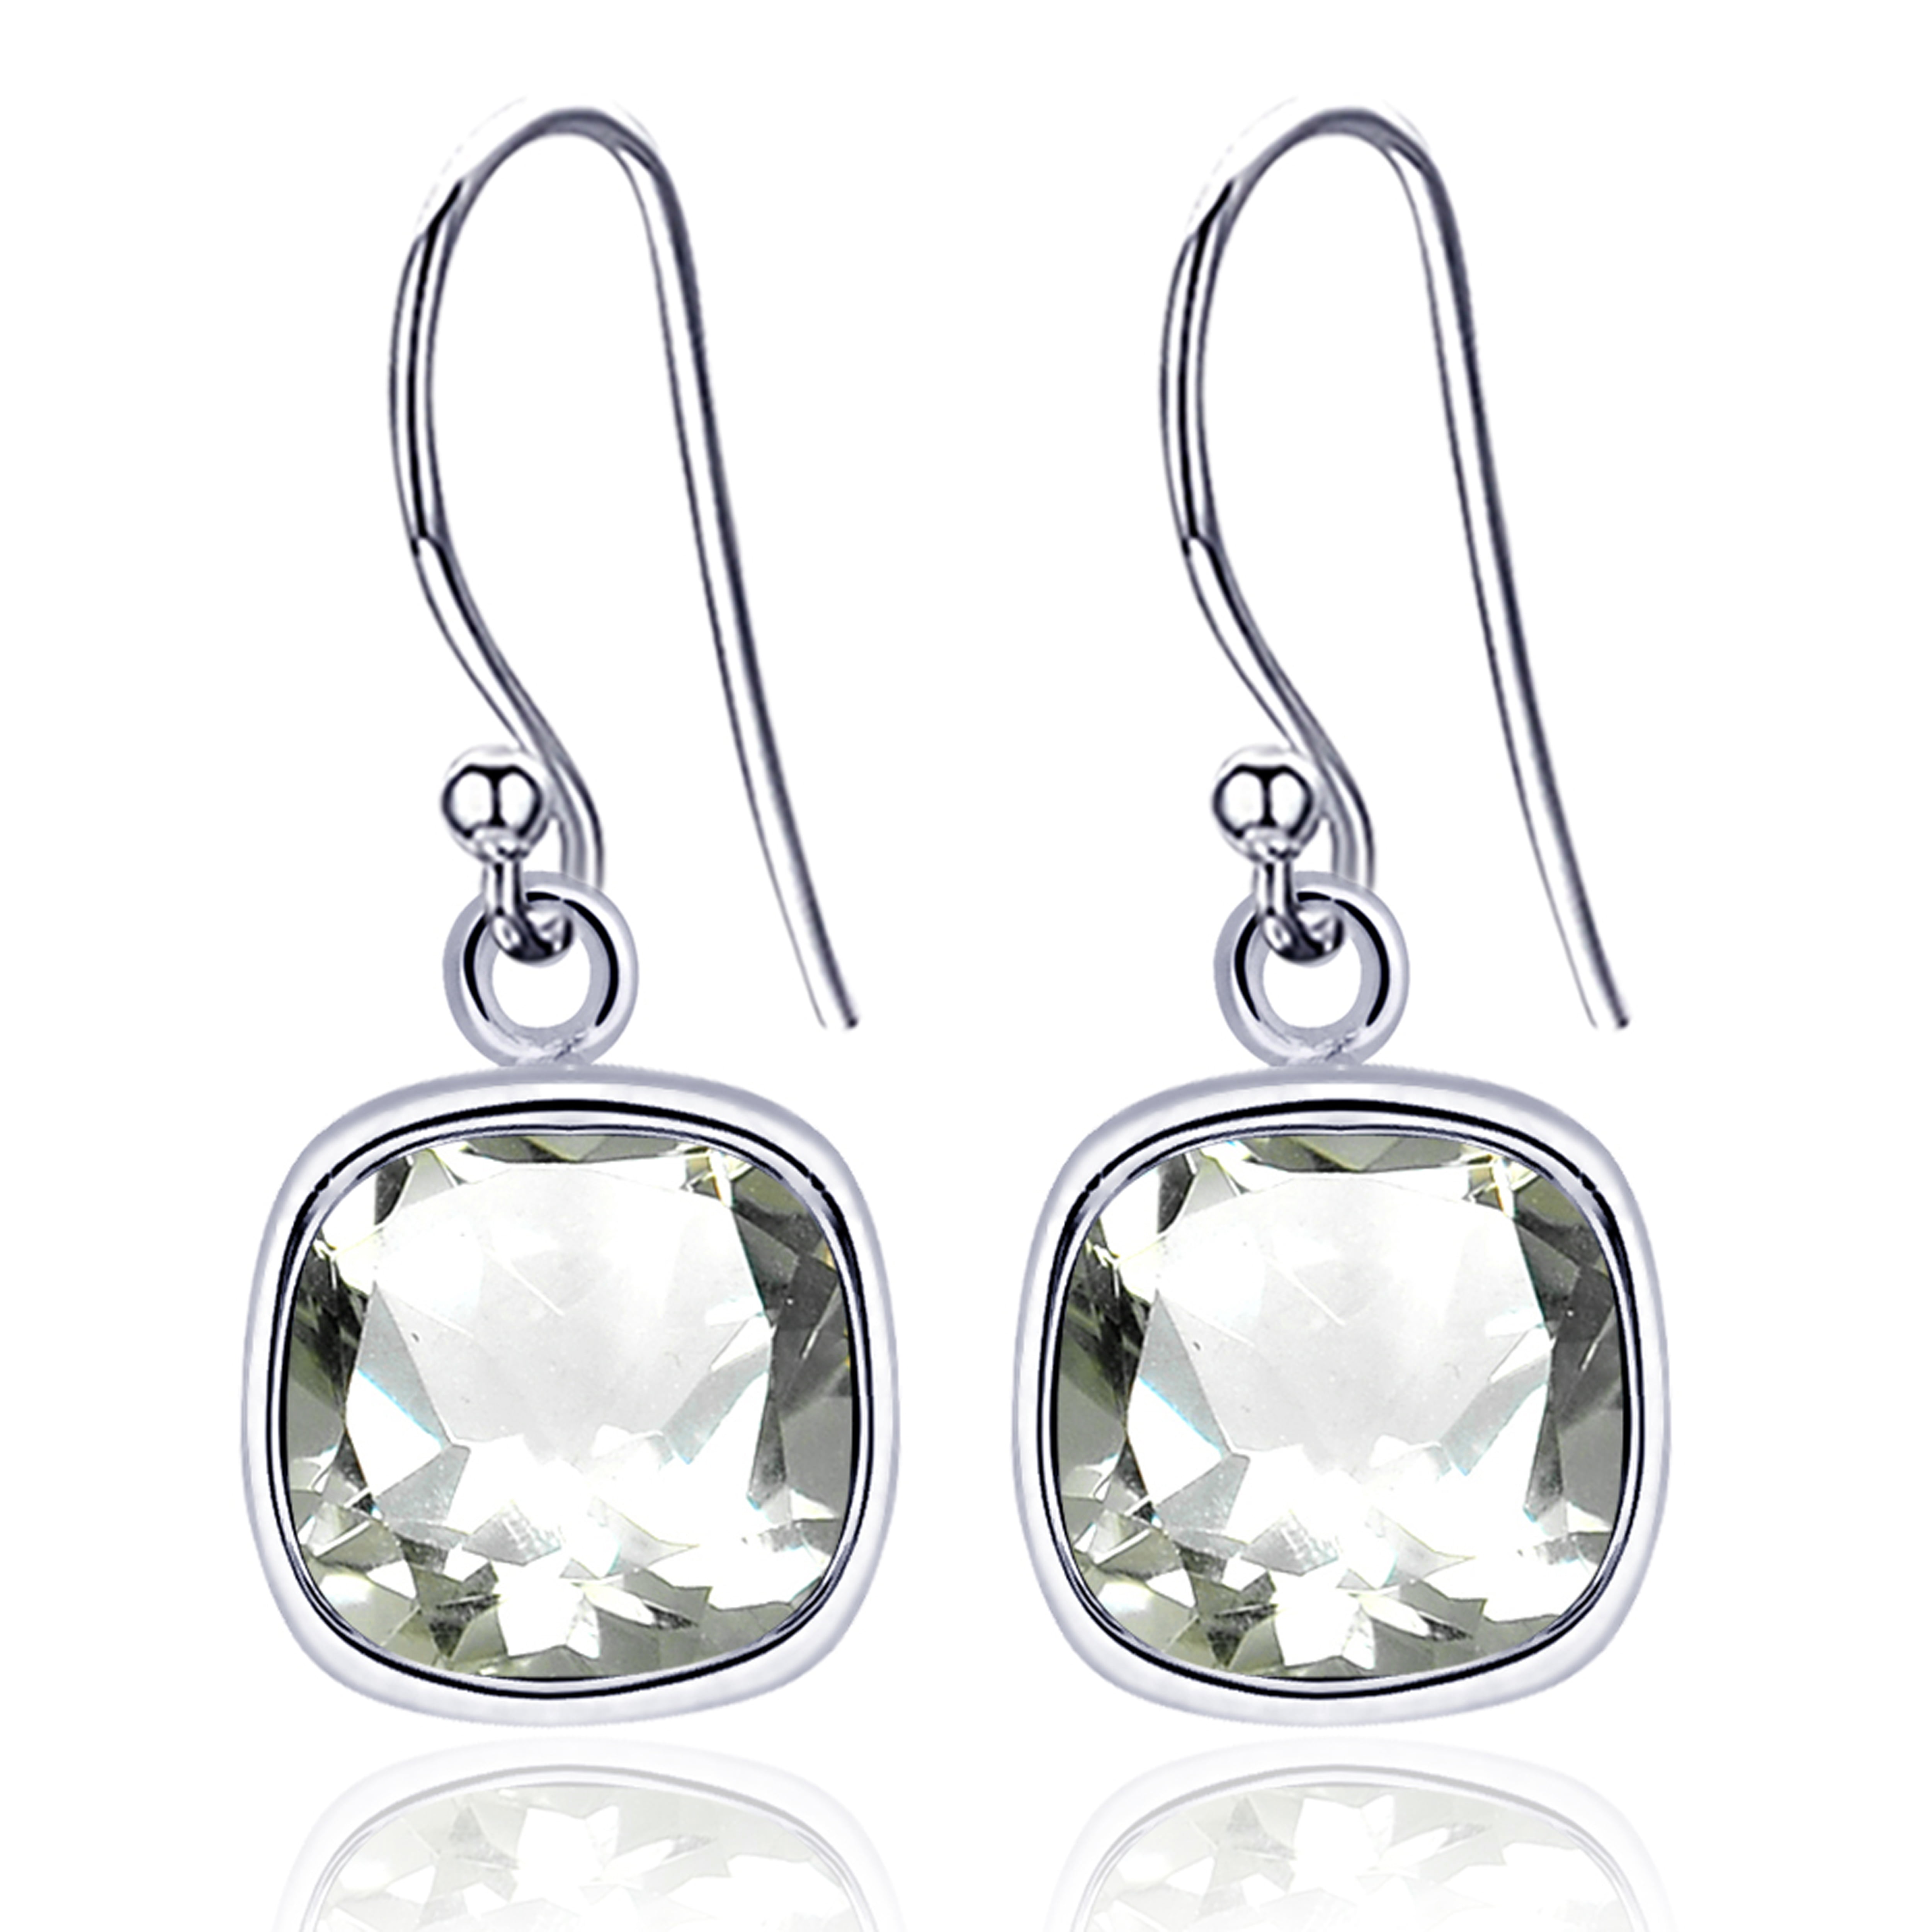 Earrings Solid 925 Sterling Silver Jewelry Natural Gemstone Free Shipping 1.8 gm